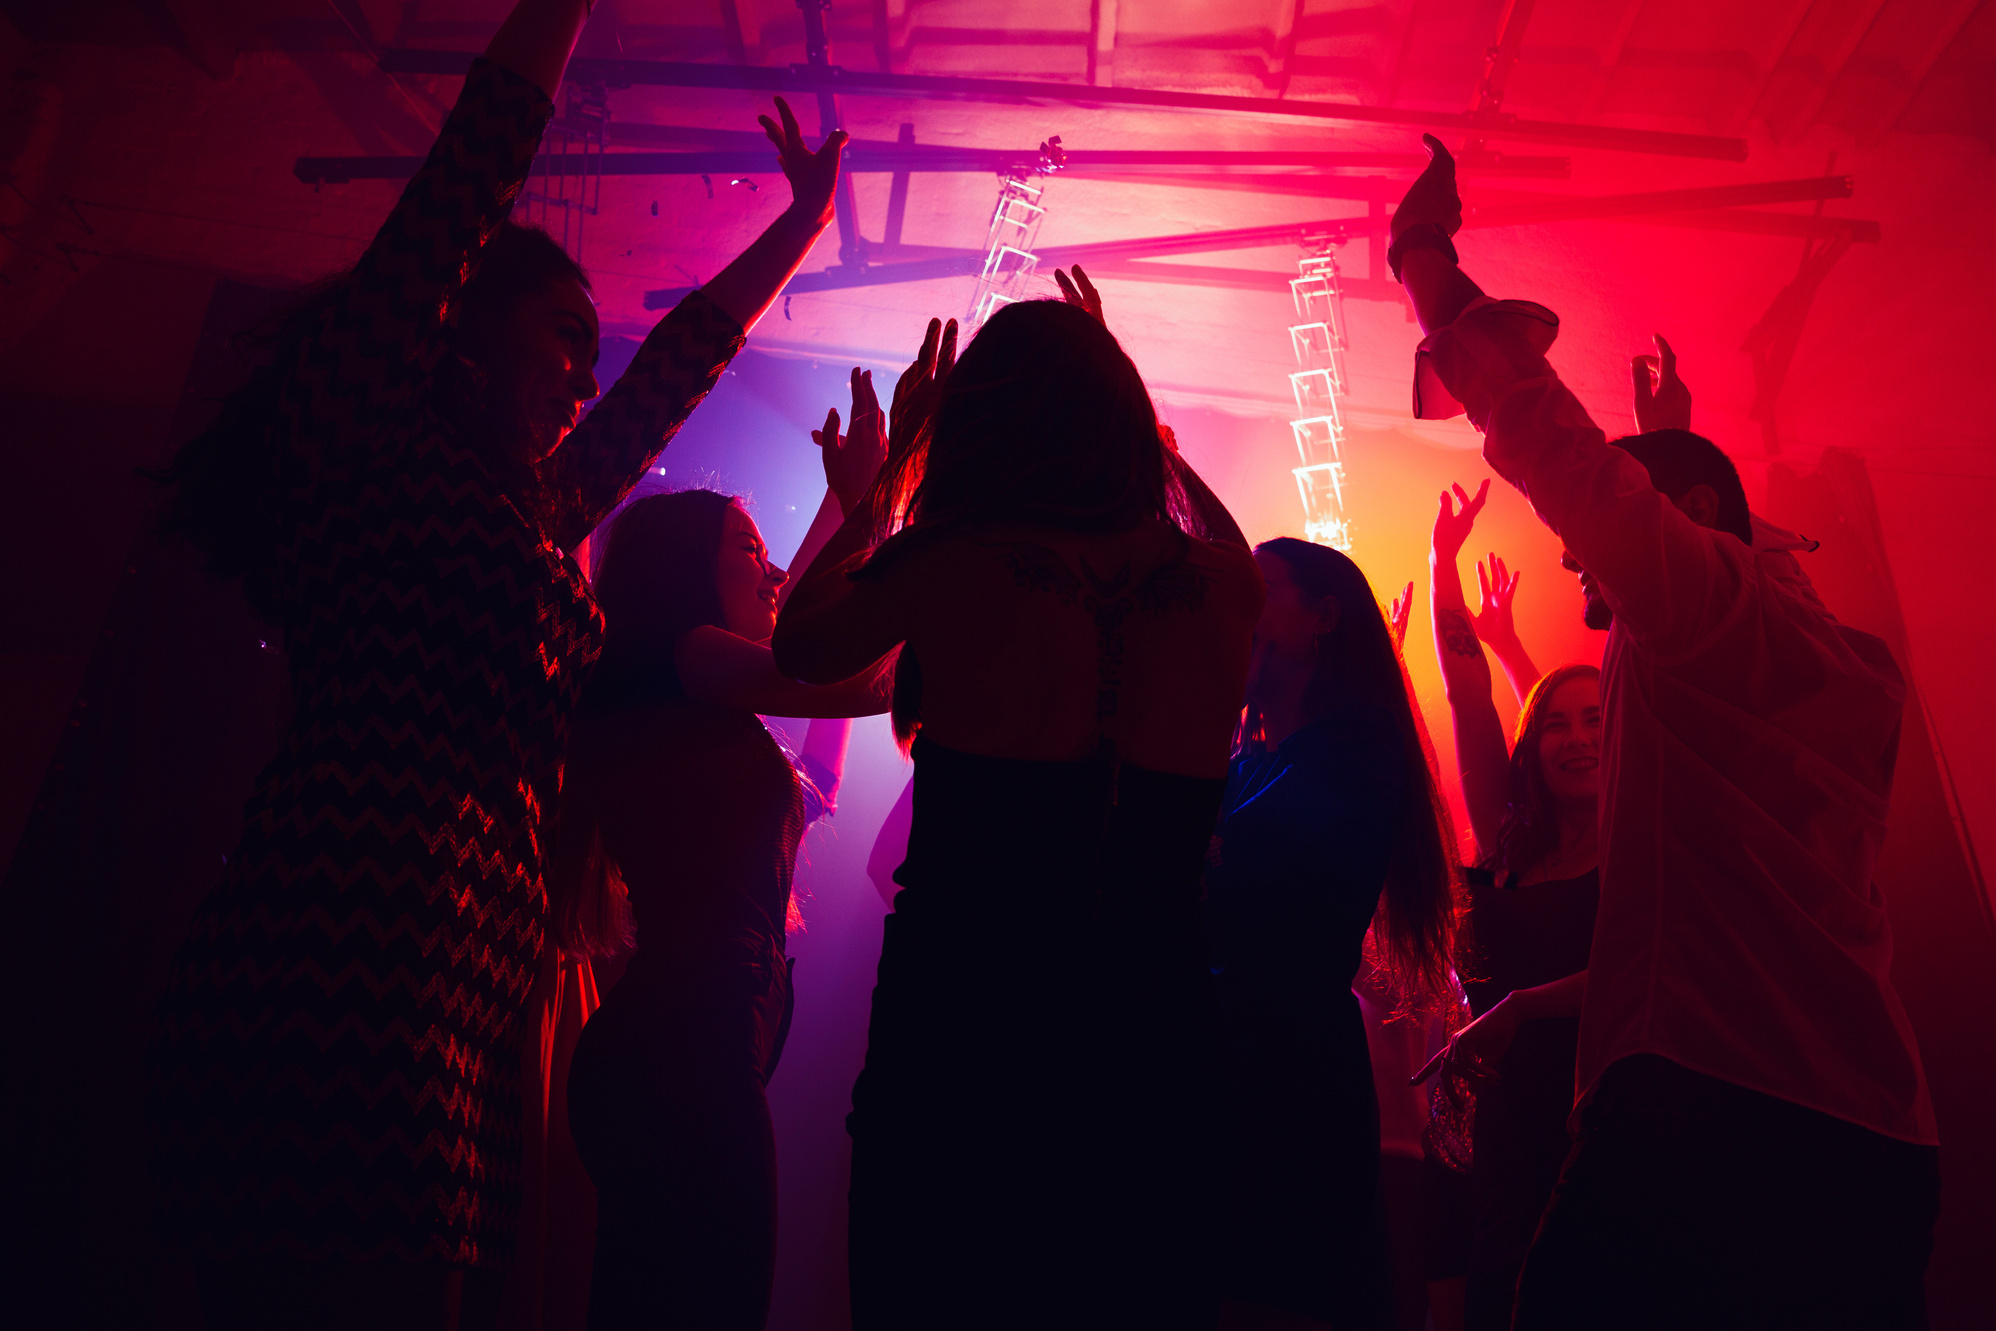 A crowd of people in silhouette raises their hands against colorful neon light on party background